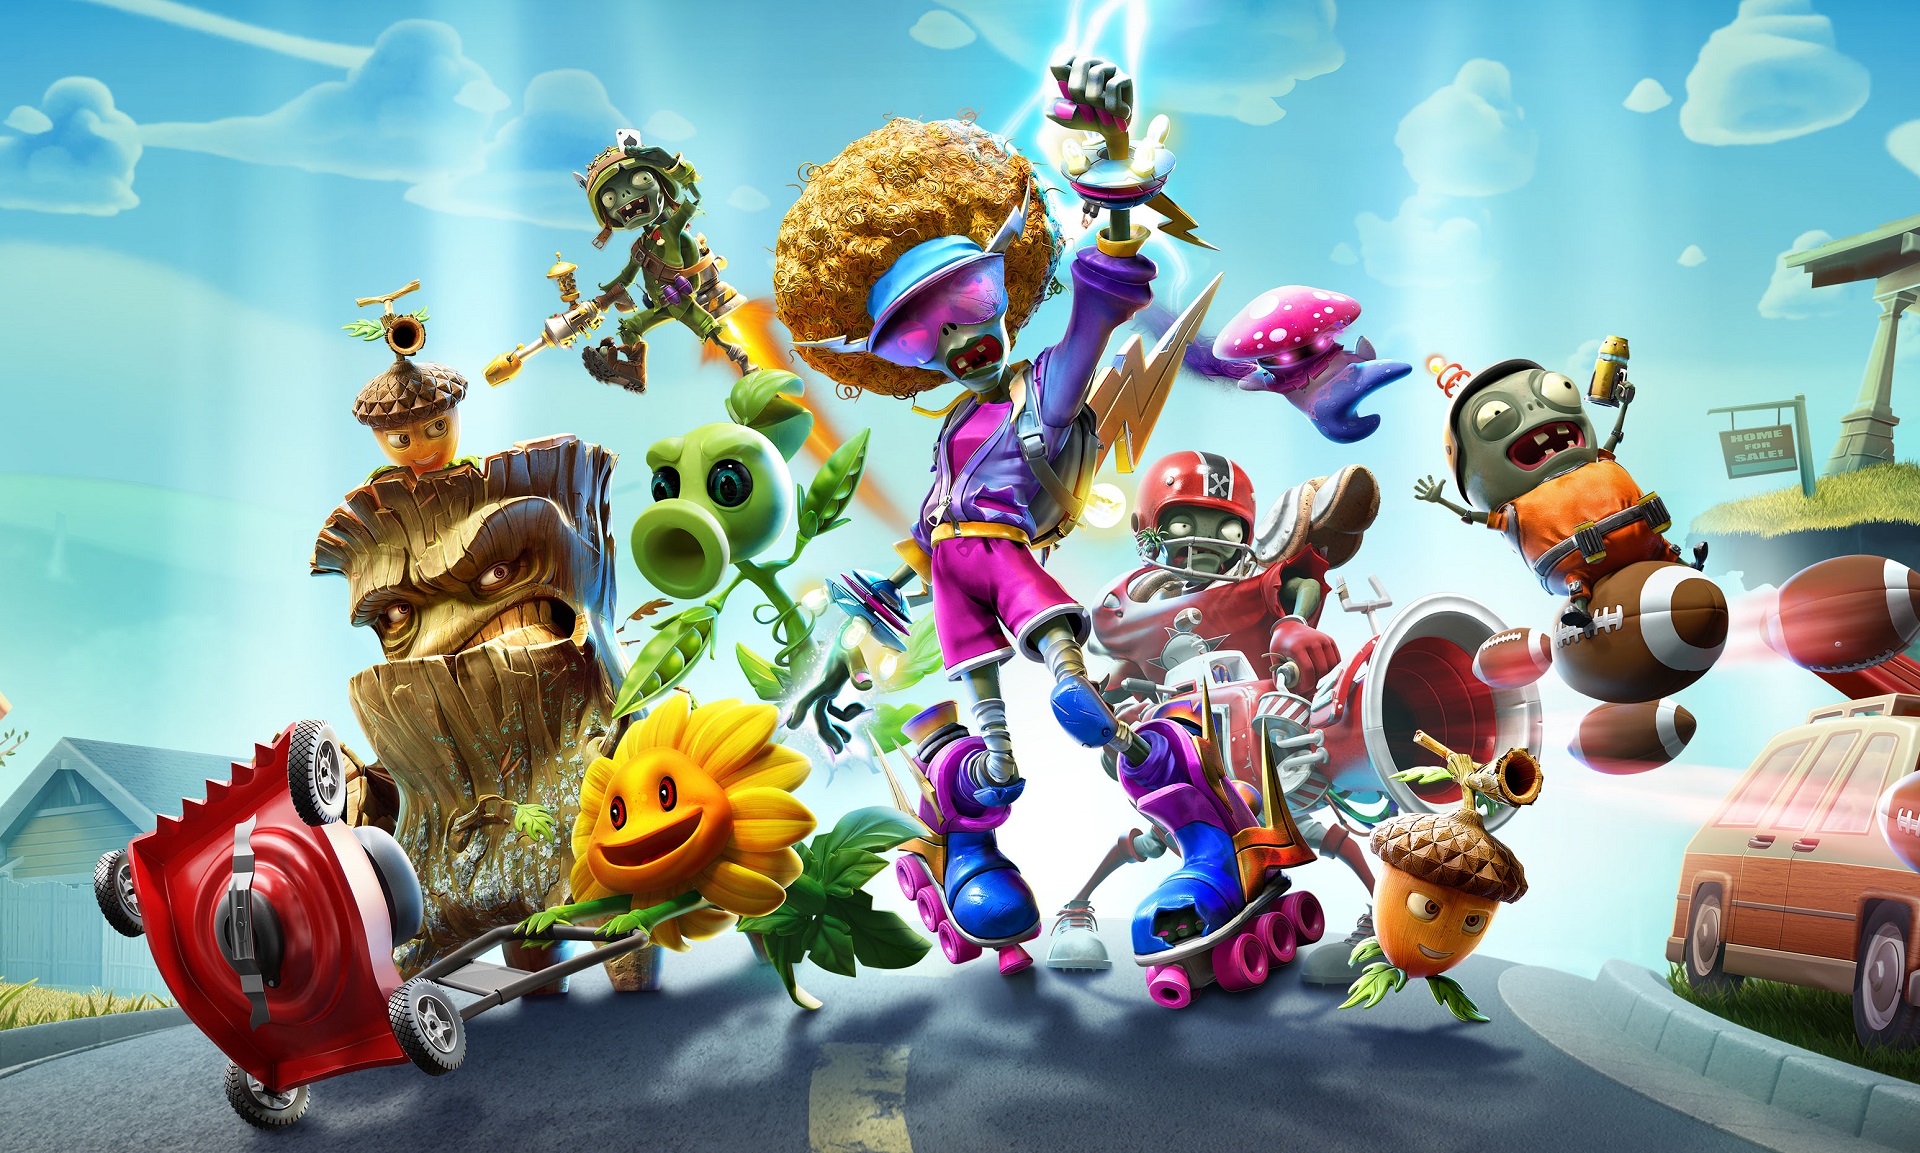 Play Plants vs. Zombies Garden Warfare 2 Free with Xbox Live Games